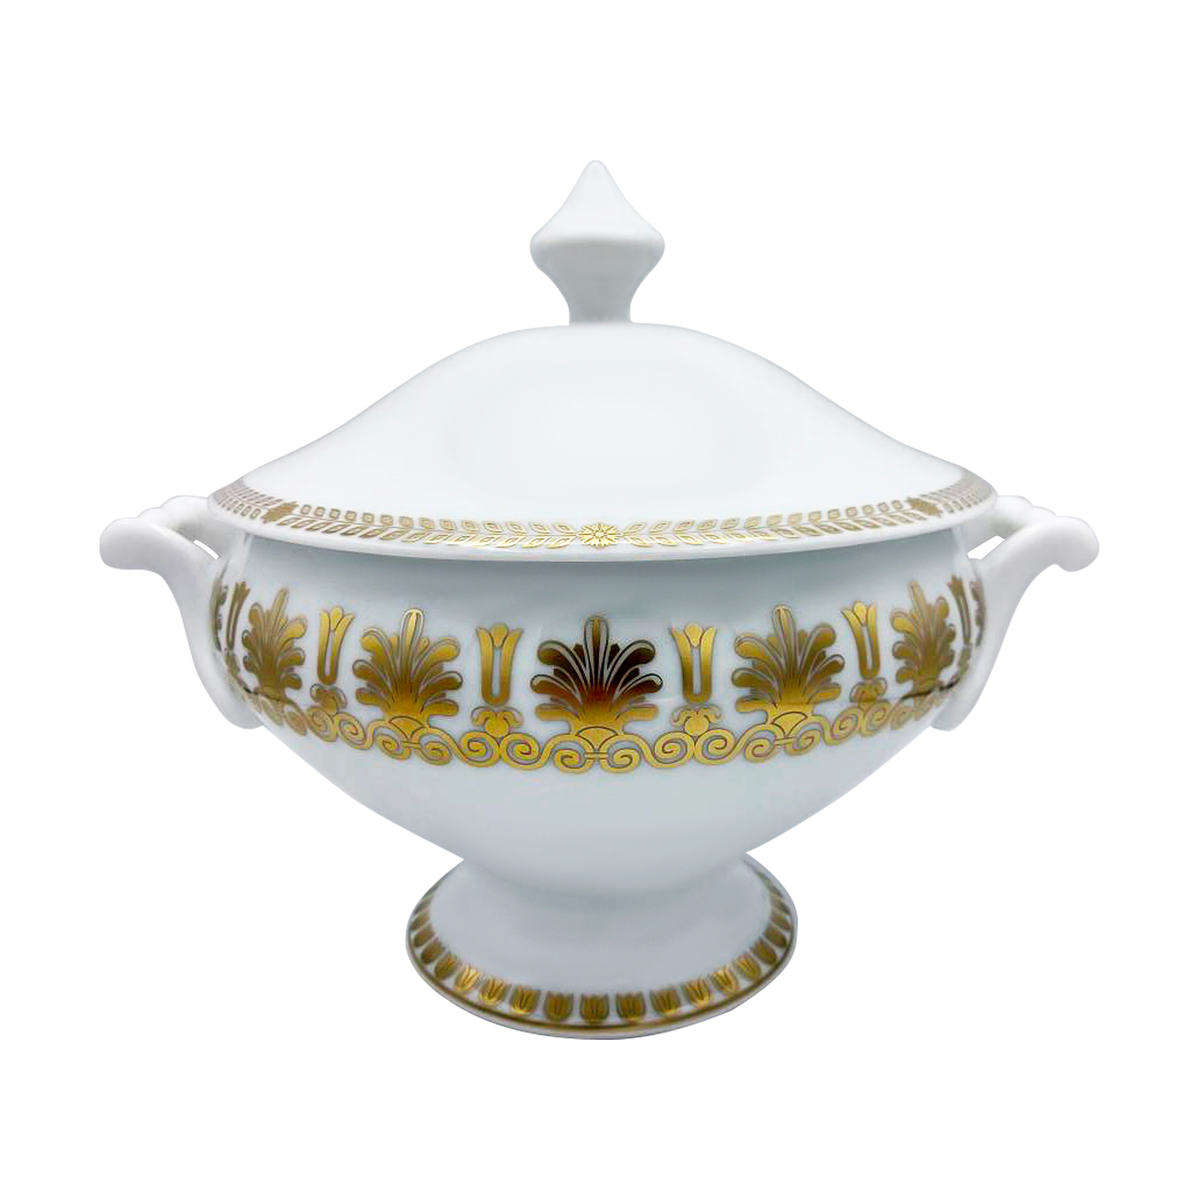 EMPIRE Gold - Soup tureen